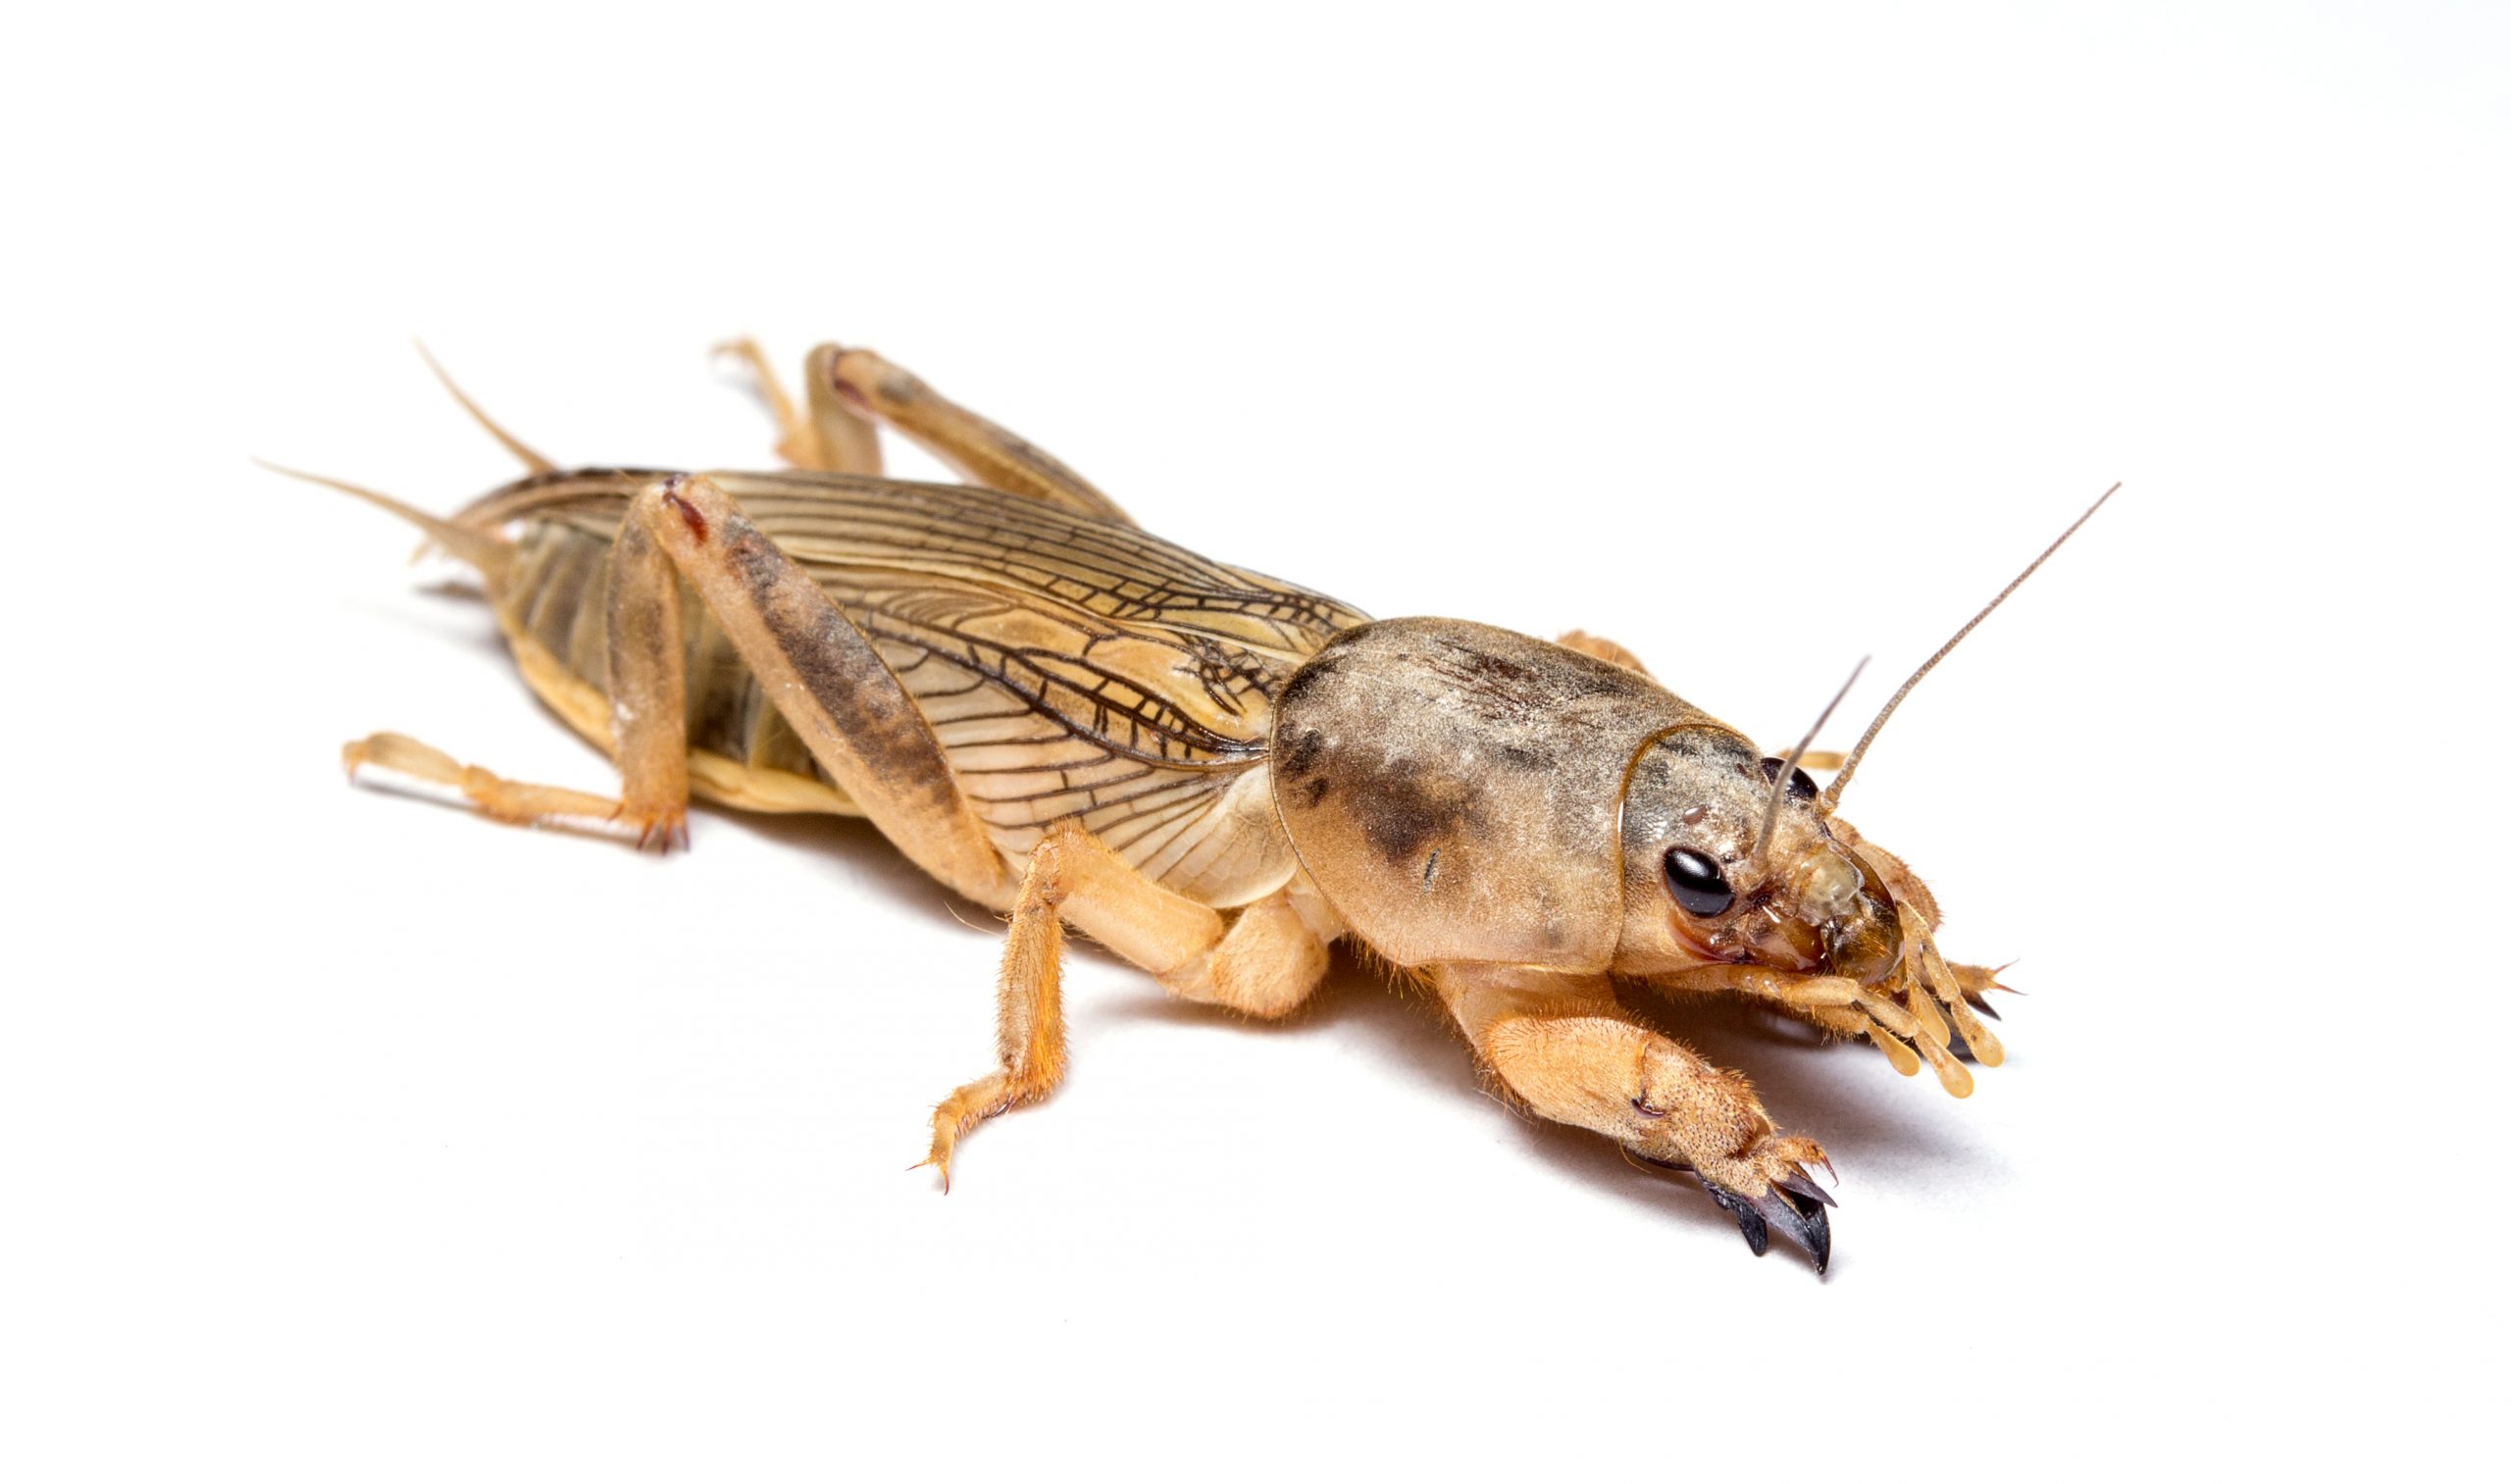 Over the past several years, mole crickets have become a serious turf pest ...